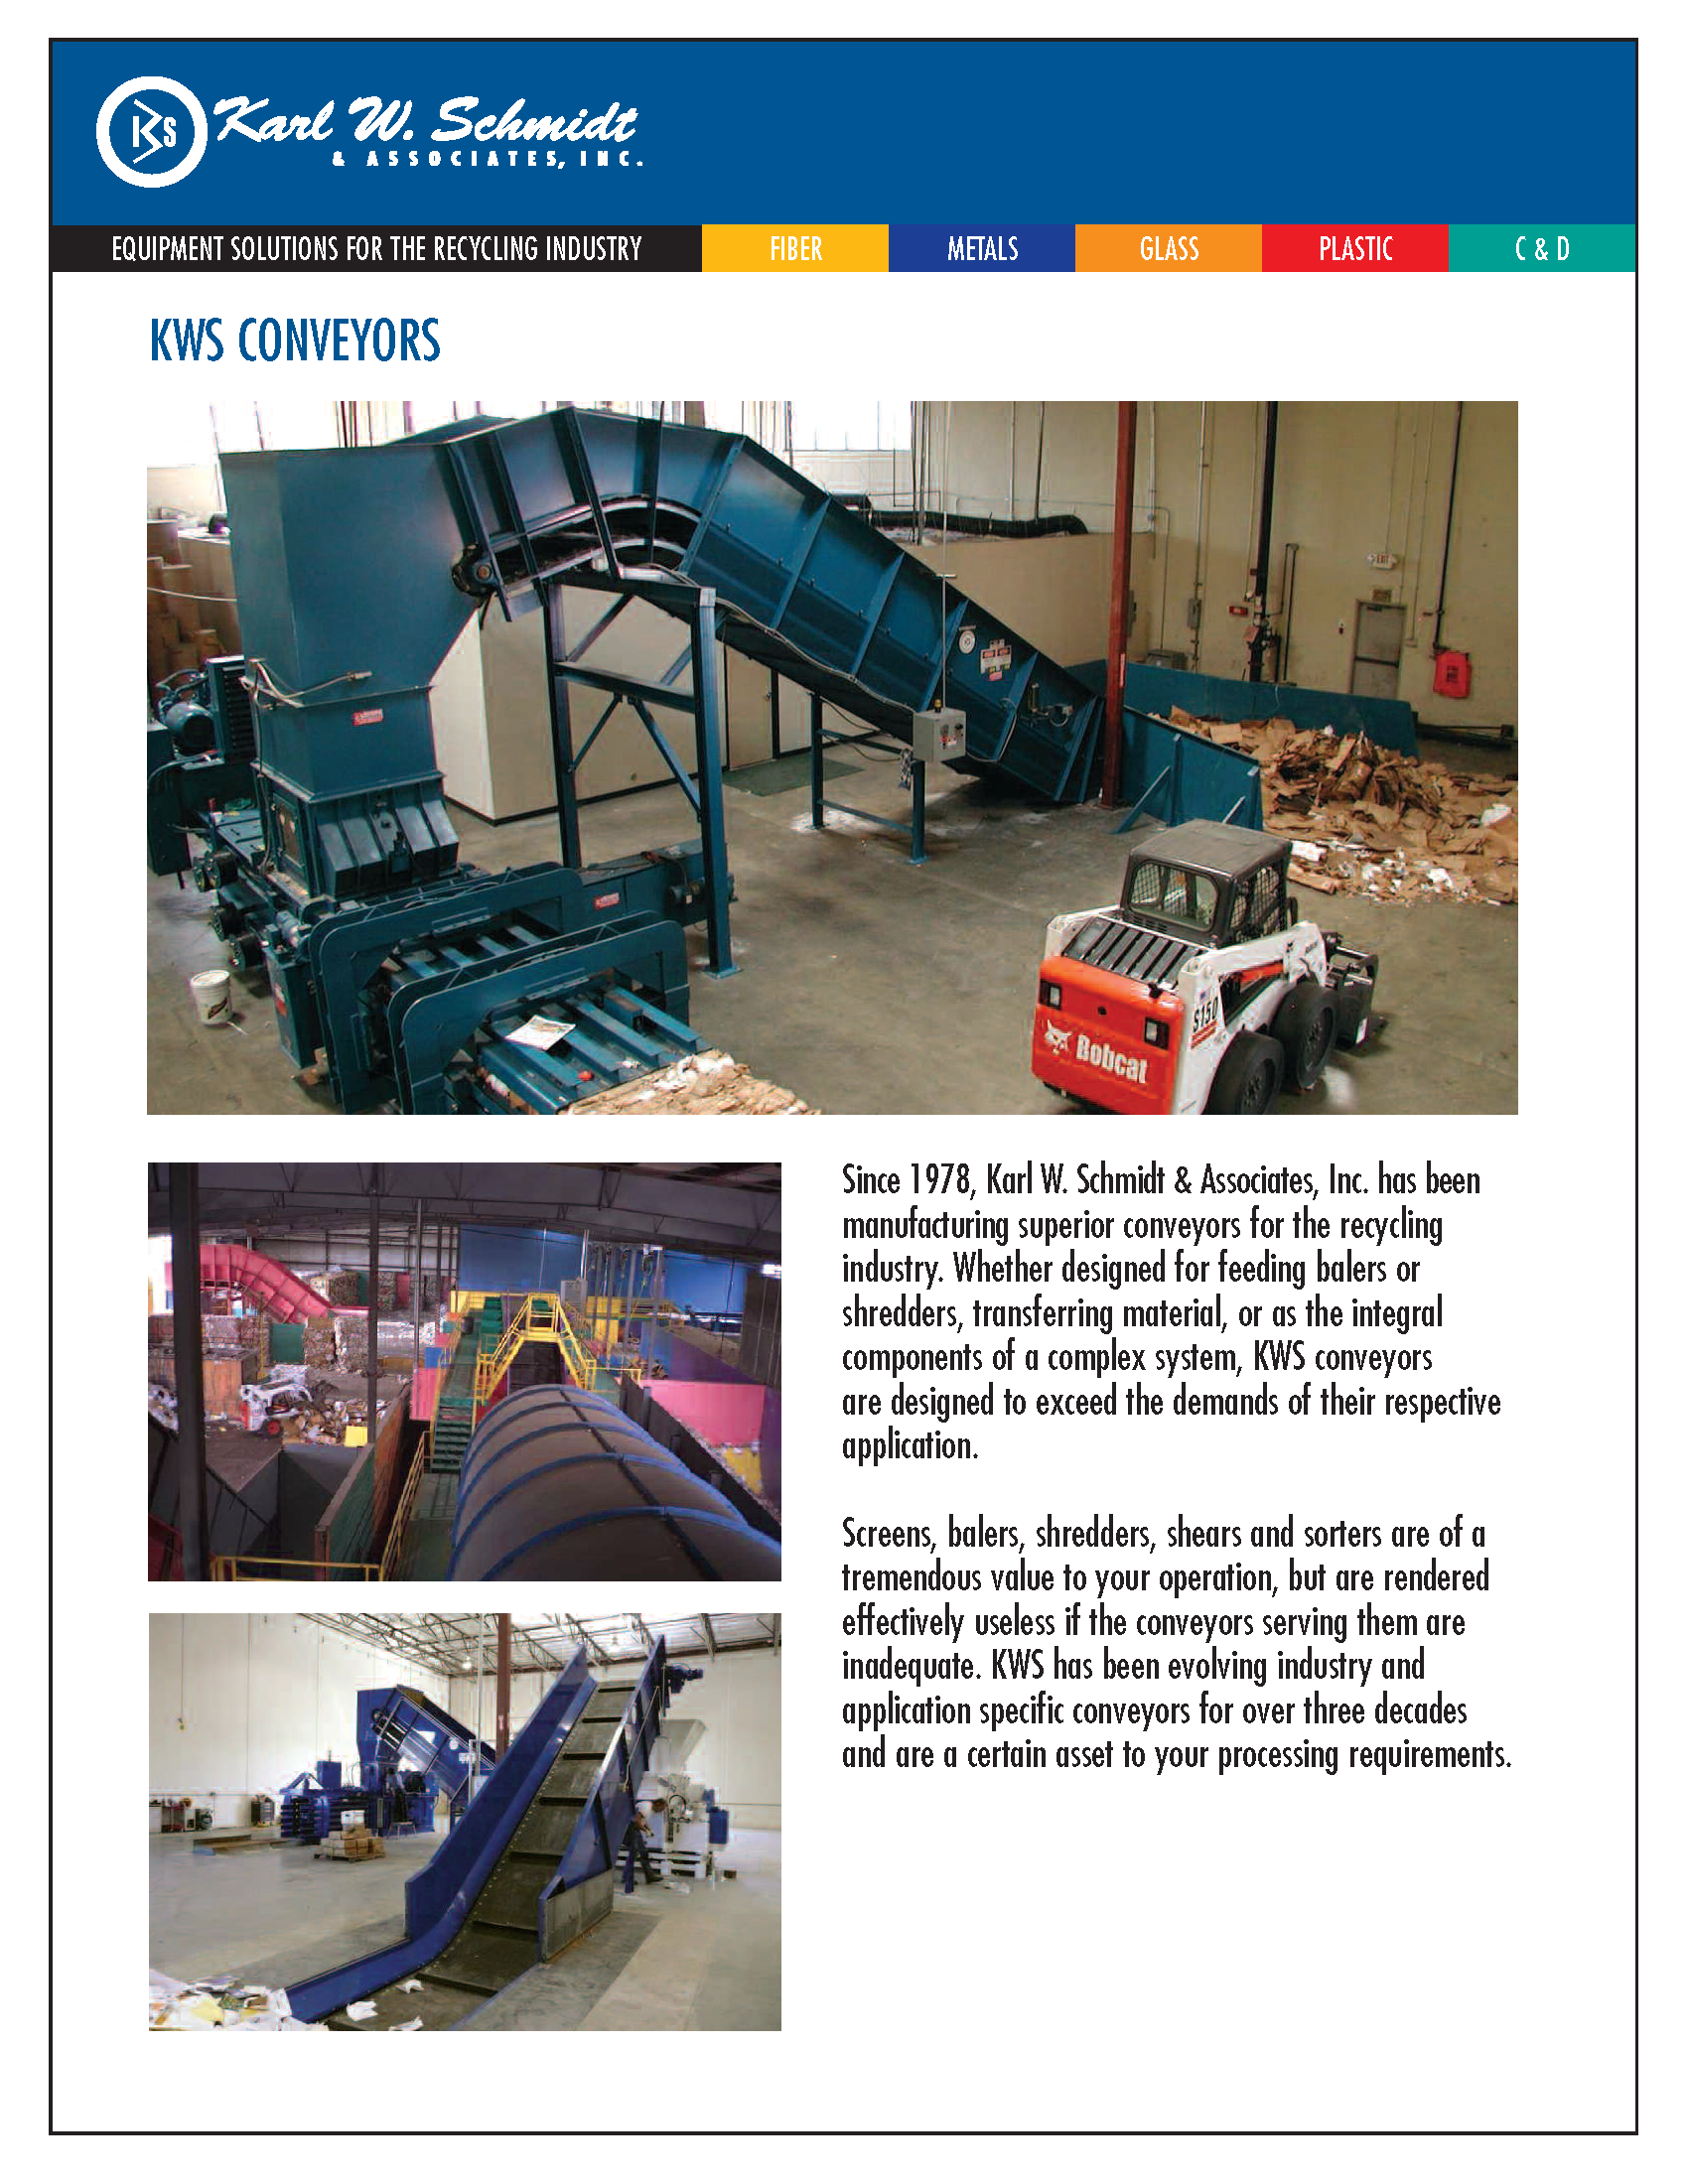 See the array of conveying solutions by Karl W. Schmidt 